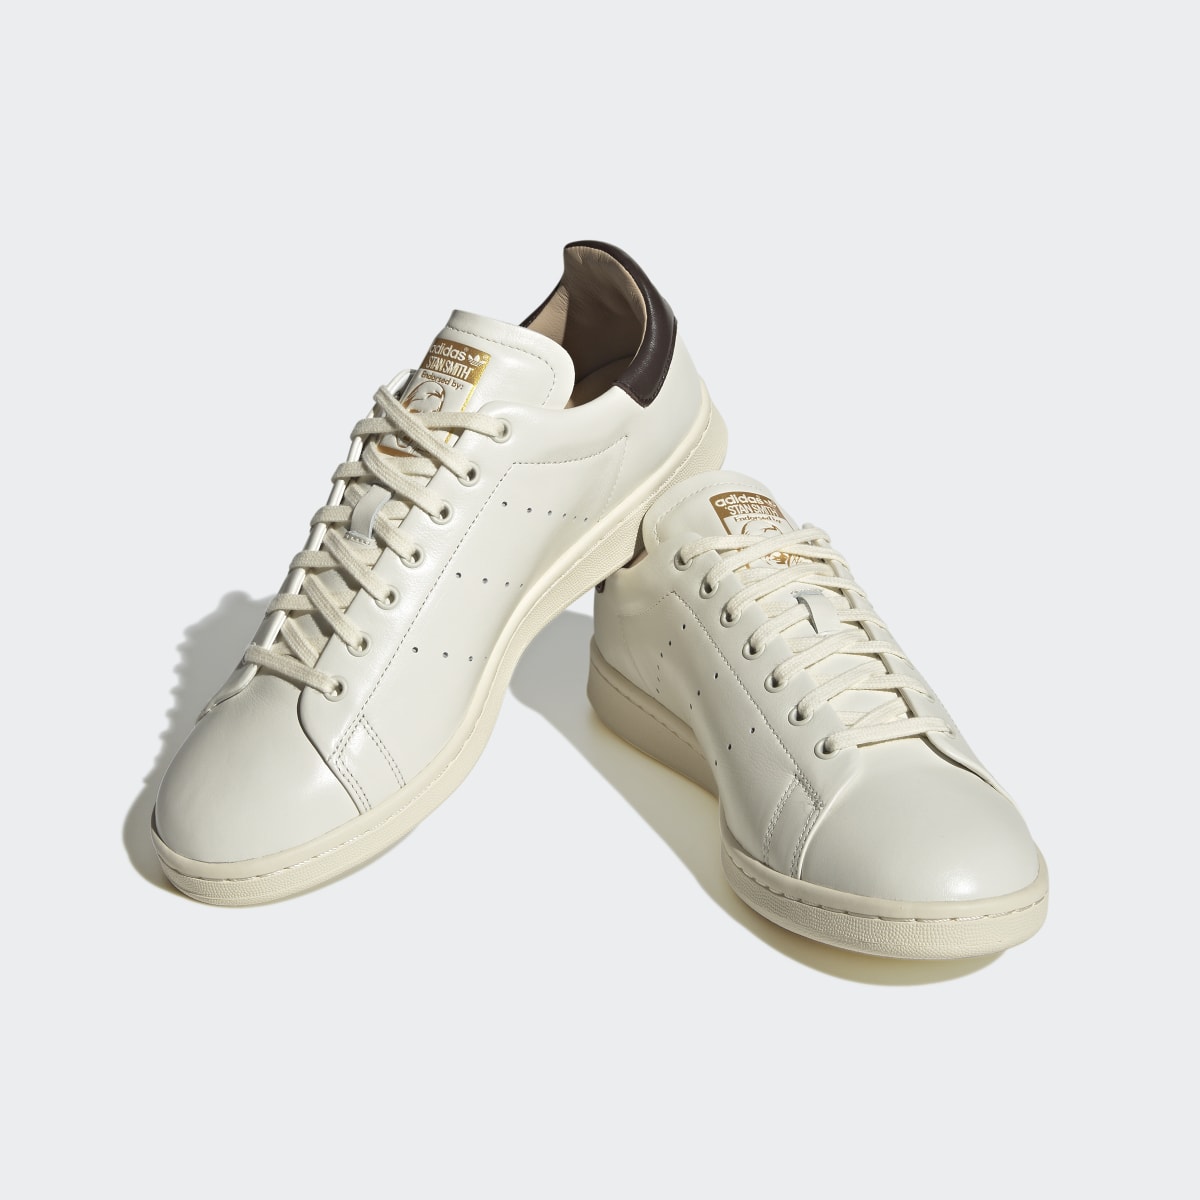 Adidas Stan Smith Lux Shoes. 5